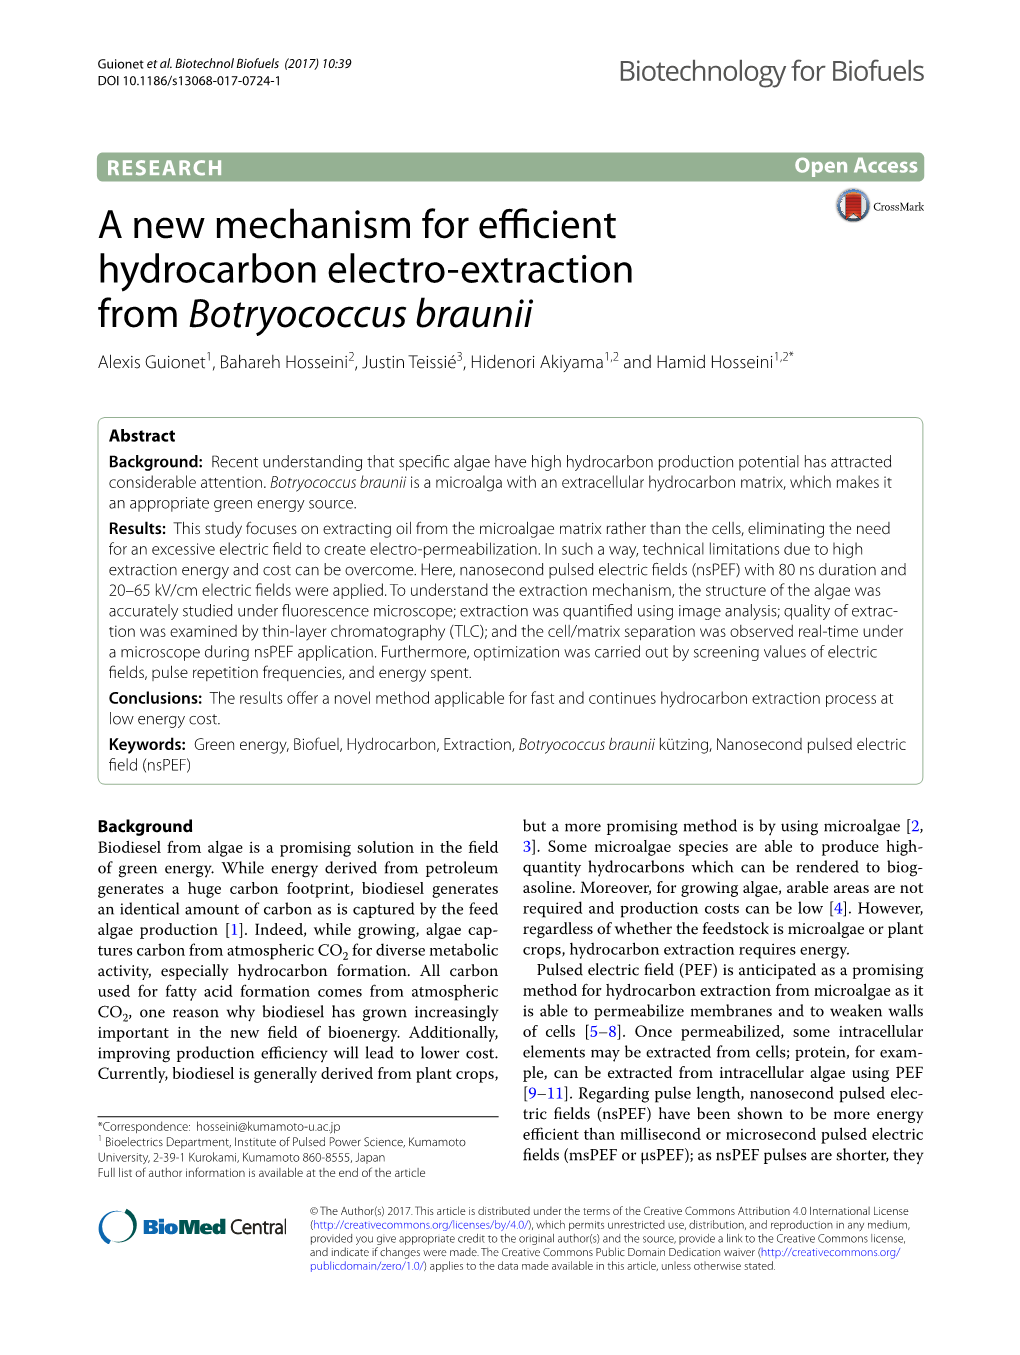 A New Mechanism for Efficient Hydrocarbon Electro-Extraction From